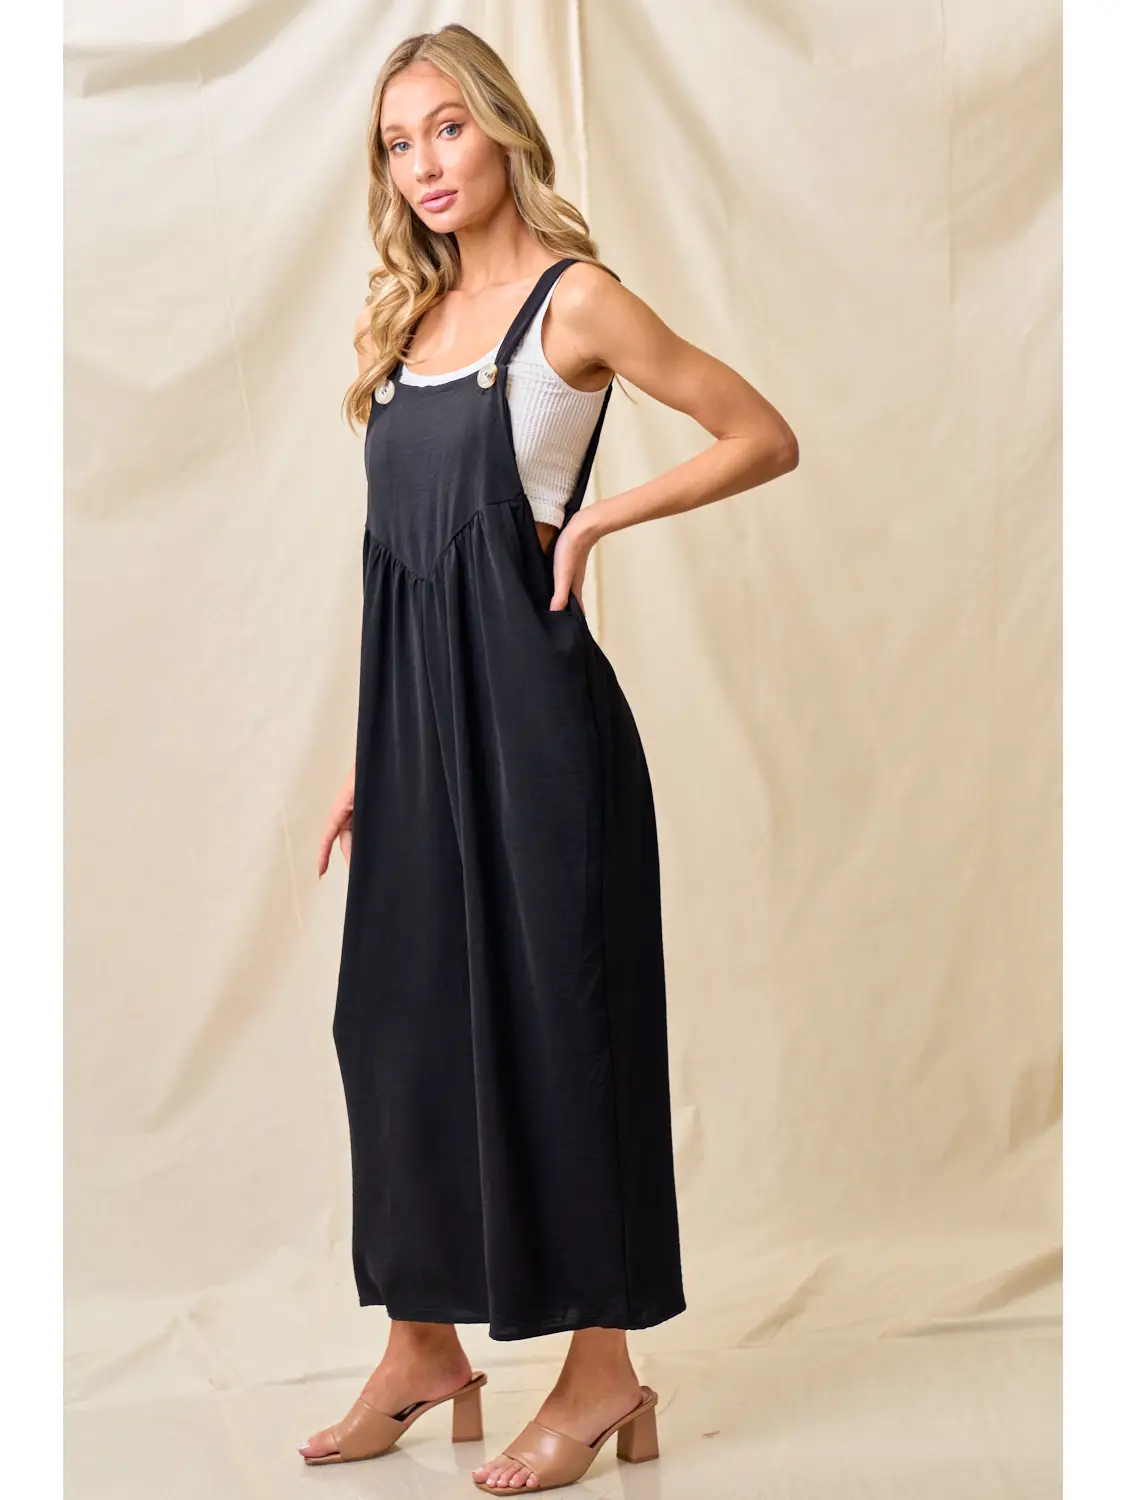 Trying to stay calm Jumpsuit: Black